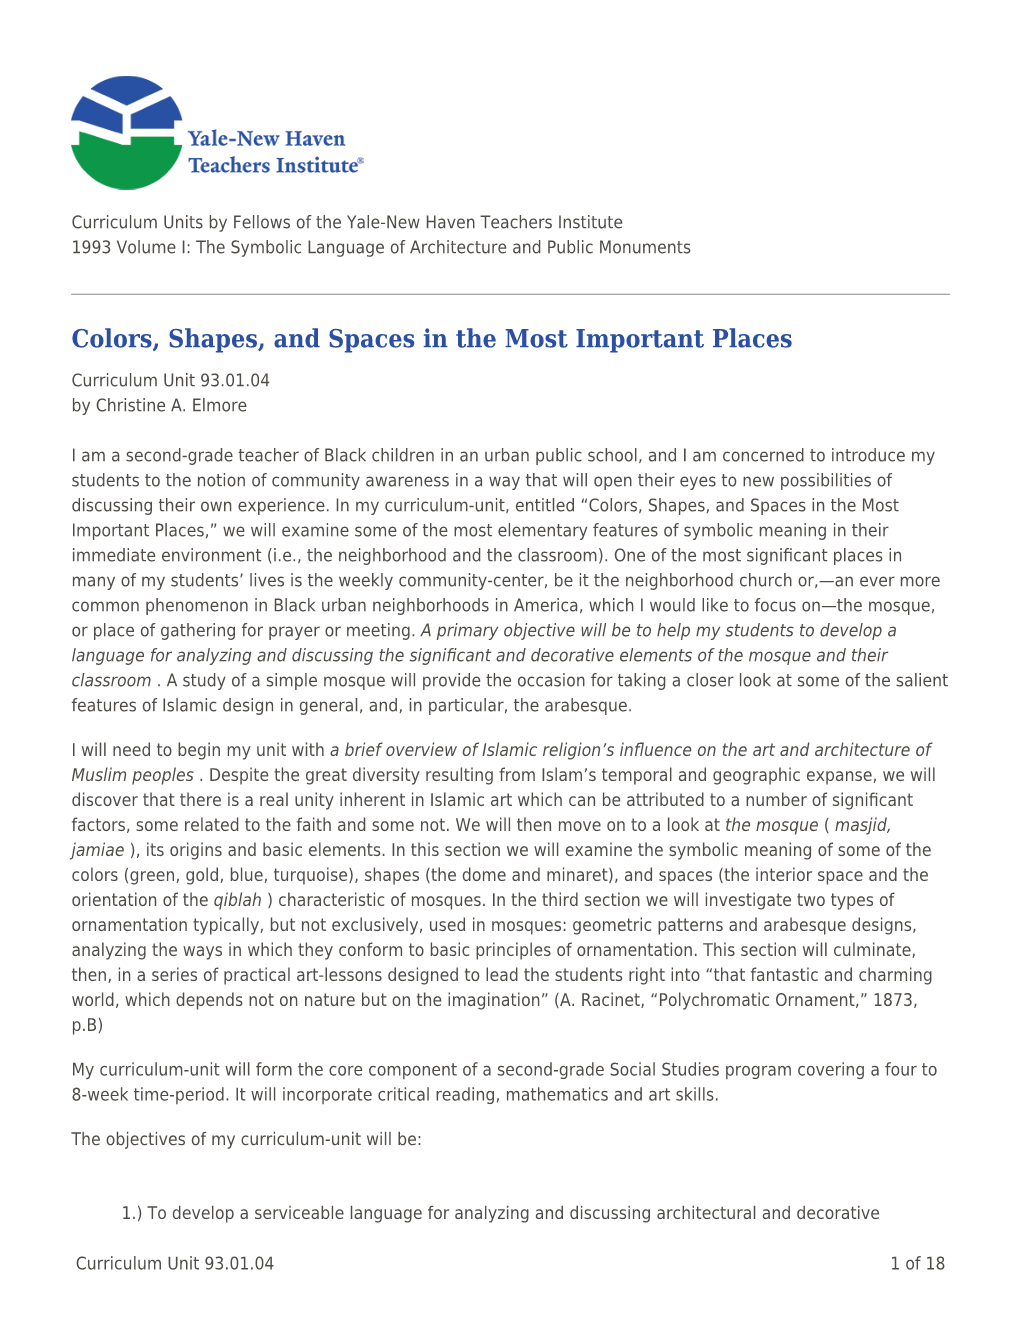 Colors, Shapes, and Spaces in the Most Important Places